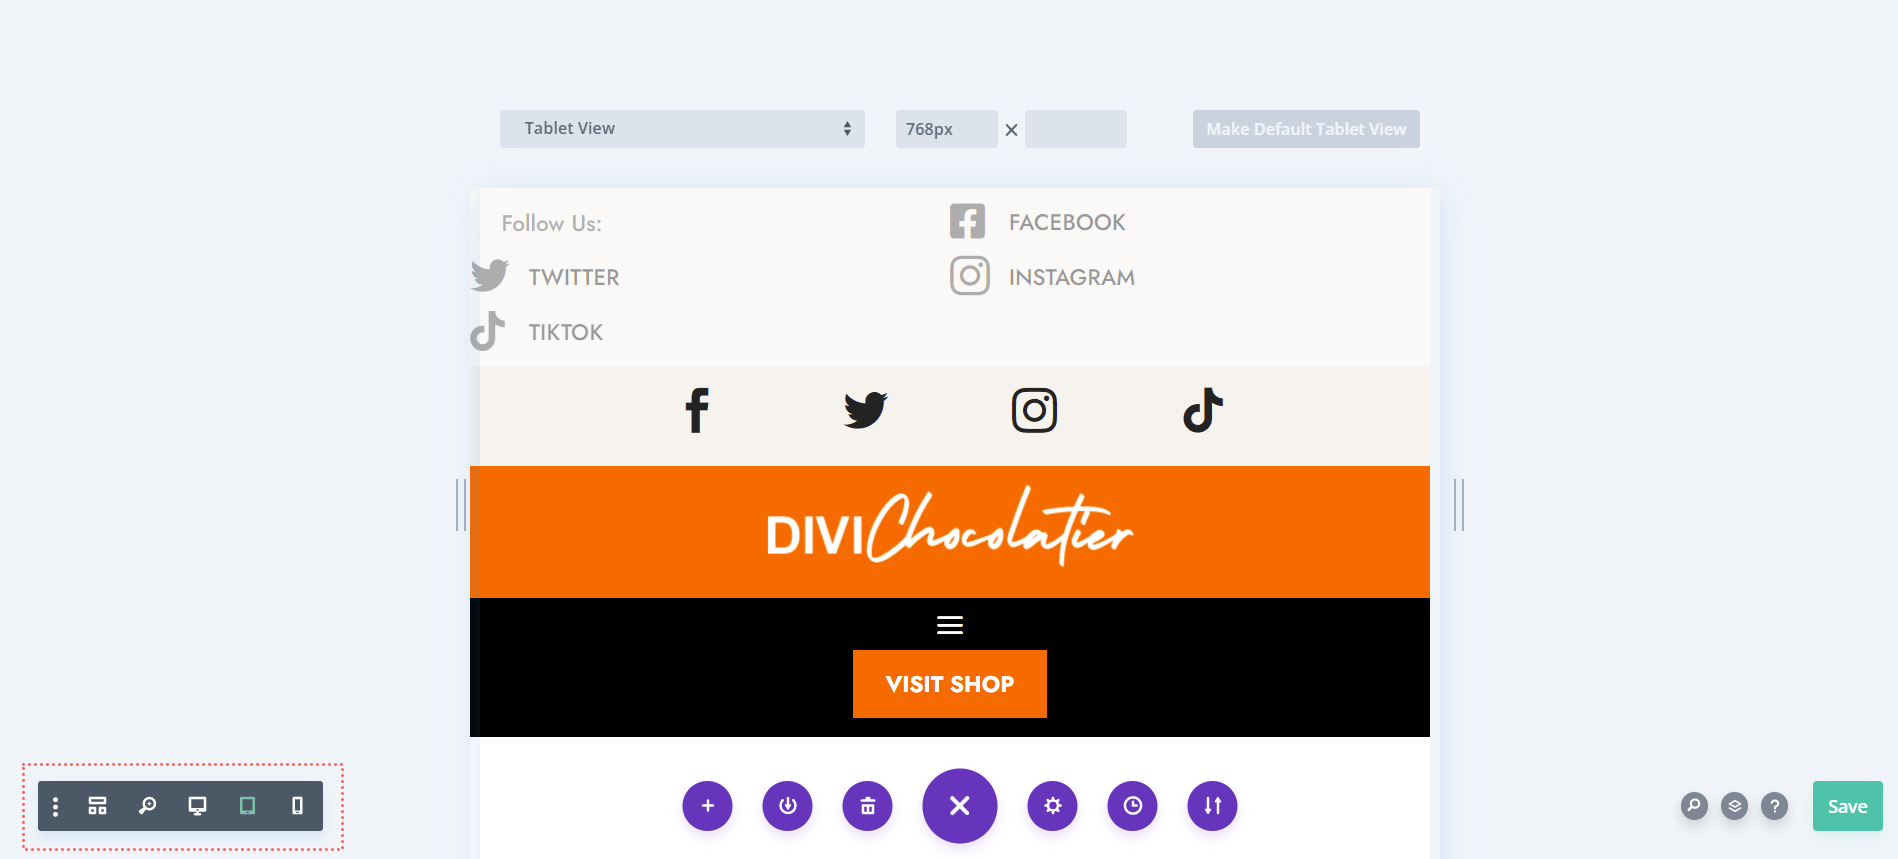 Keyboard shortcuts within Divi allow you to switch views from desktop, tablet and mobile